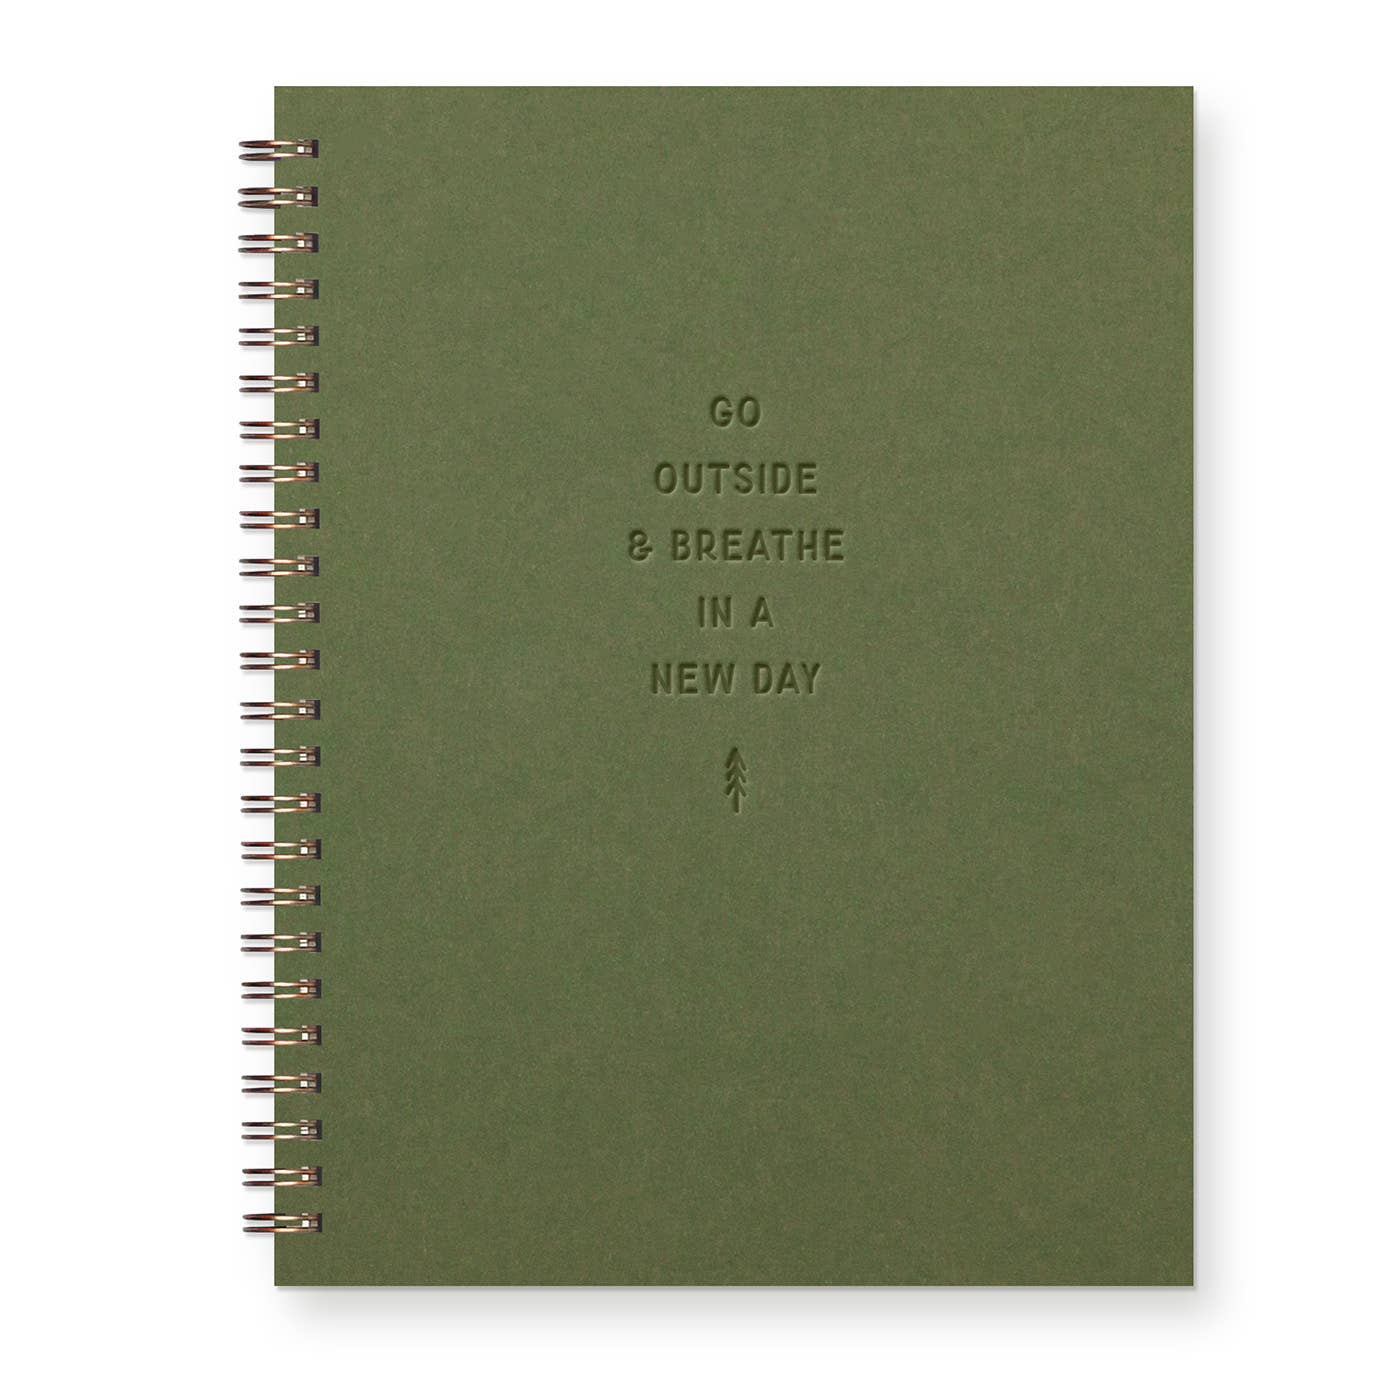 Breathe in a New Day Journal: Lined Notebook